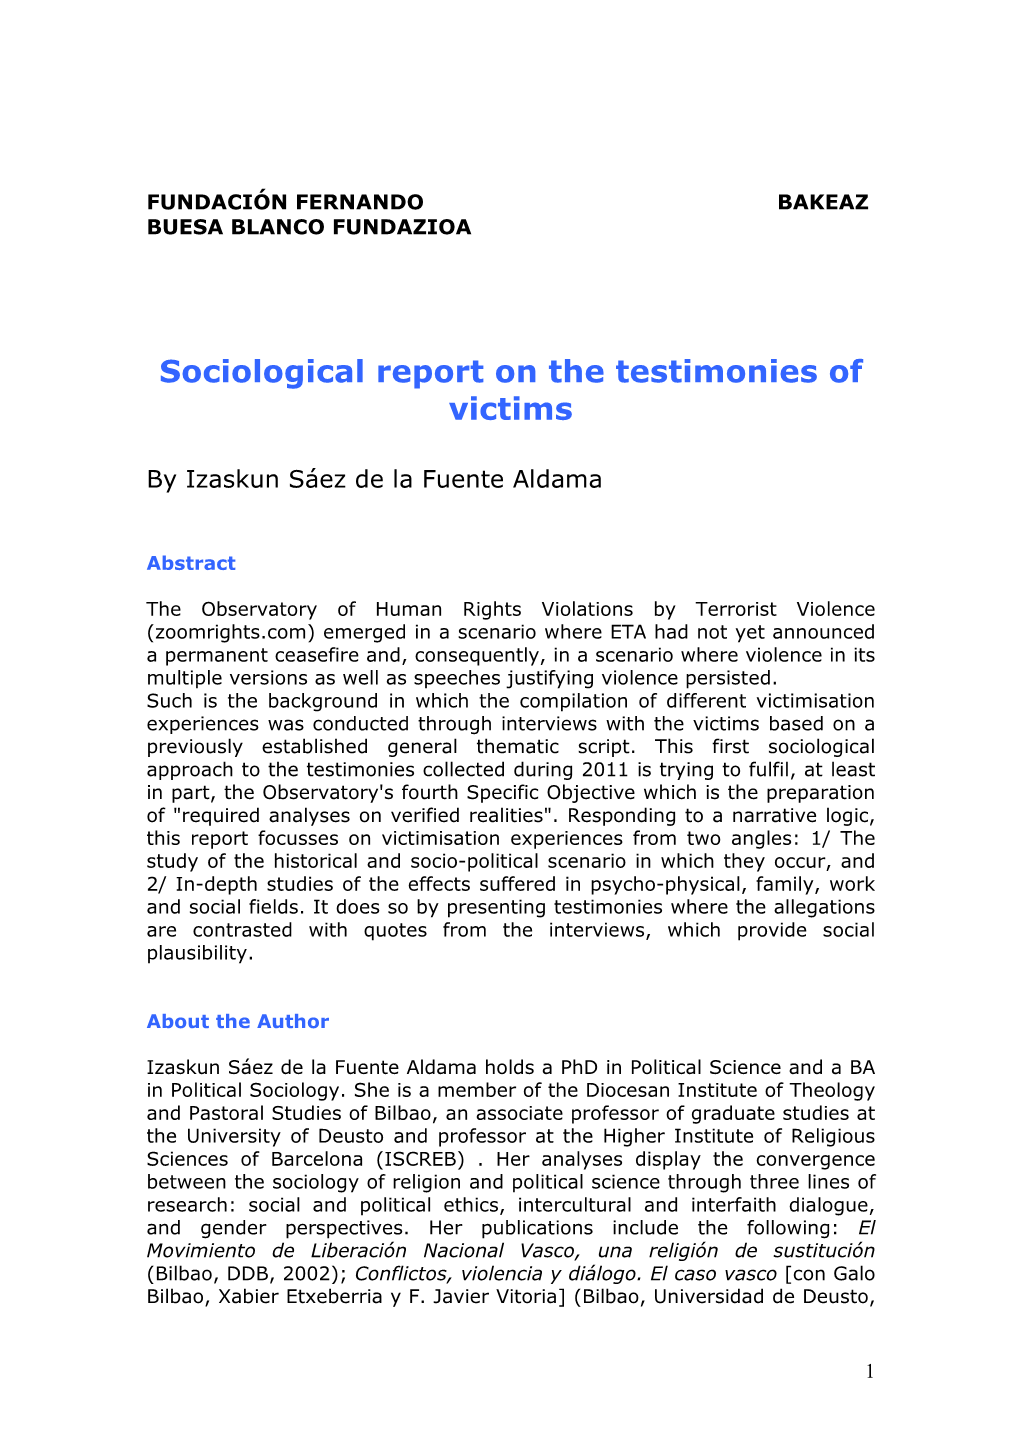 Sociological Report on the Testimonies of Victims